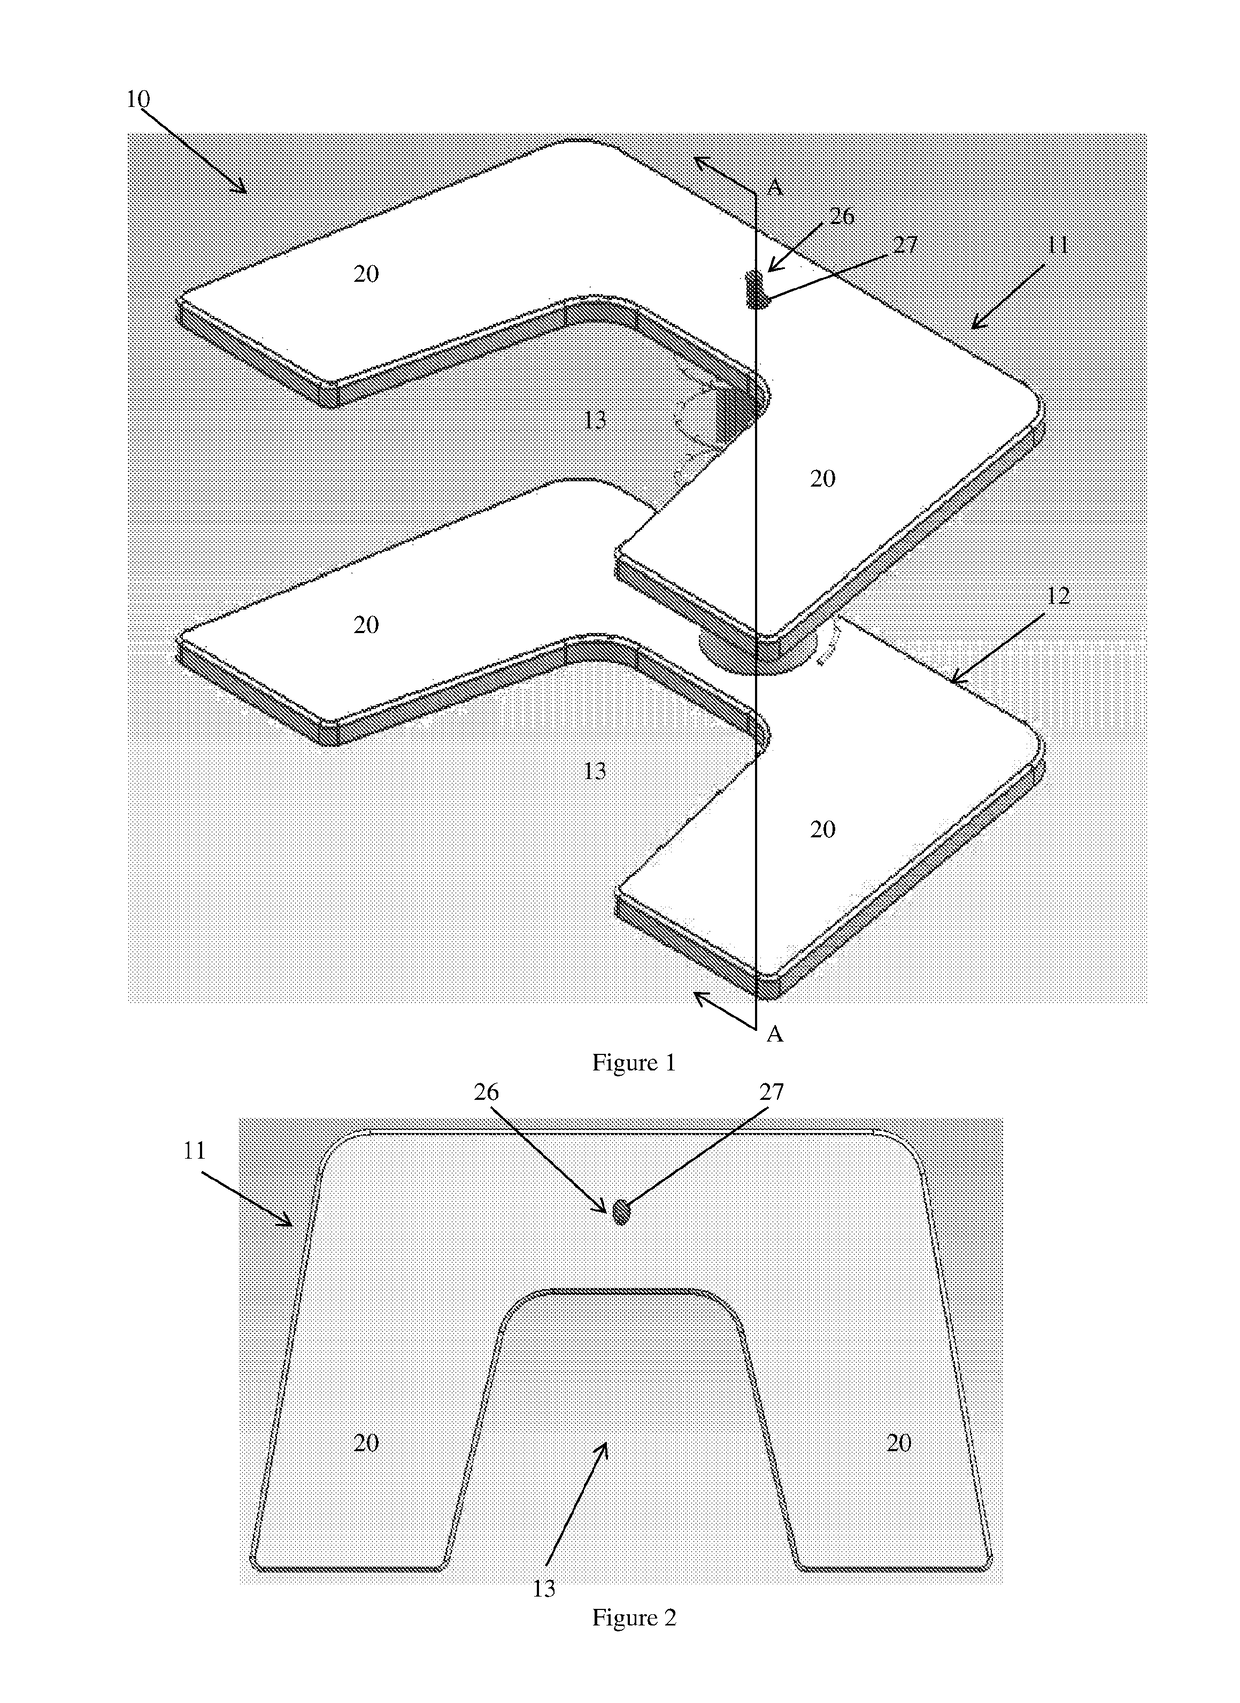 Apparatus for assisting toileting